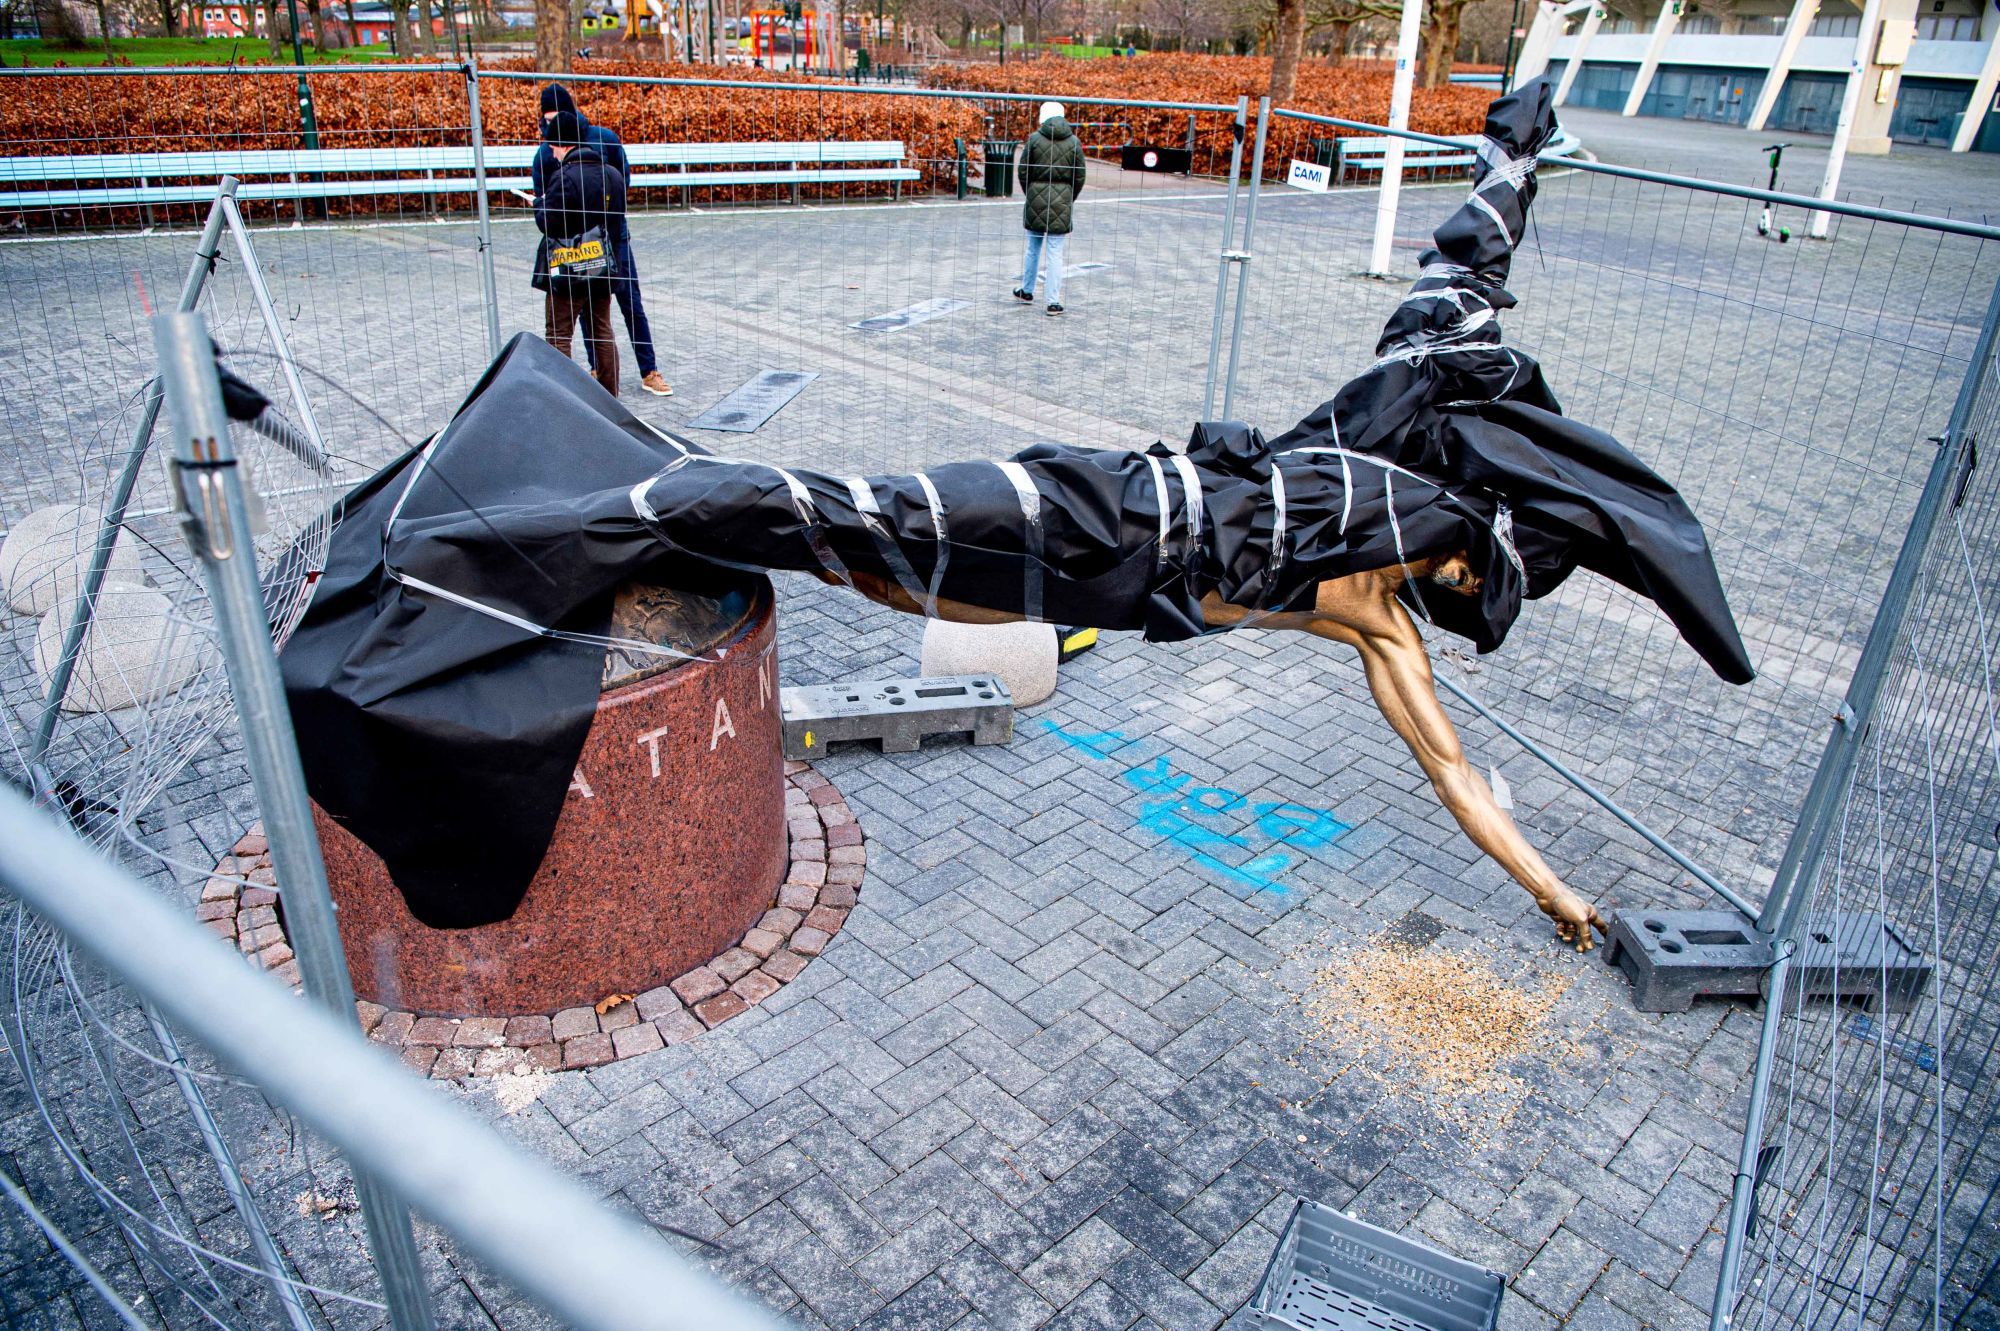 200105 The statue of Zlatan Ibrahimovic has been vandalized, photographed on January 5, 2020 in Malmö.
Photo: Christian Örnberg / BILDBYRÅN / Cop 166 

Photo by Icon Sport - Malmo (Suede)